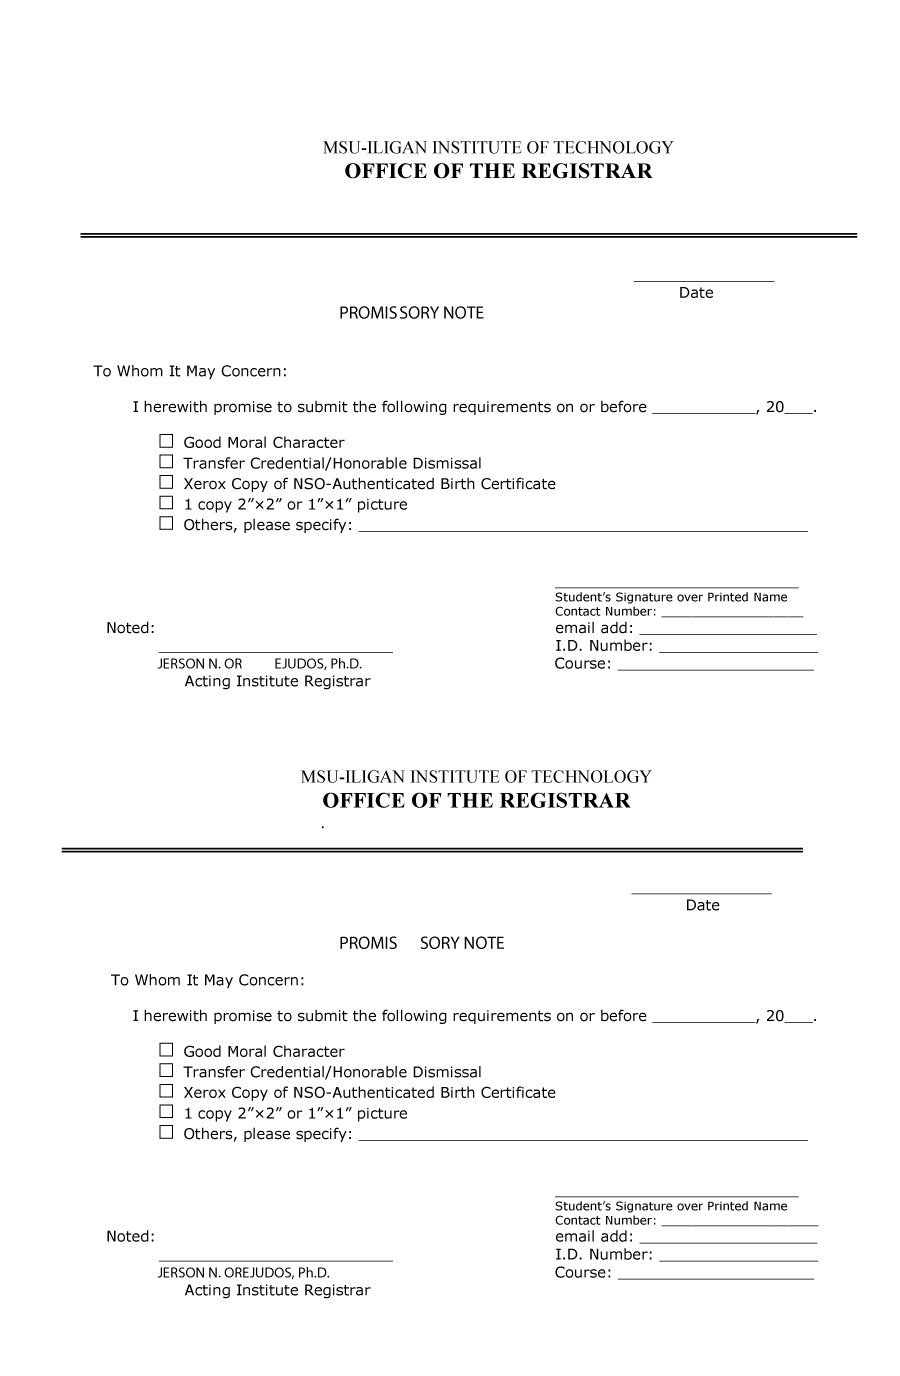 45 Free Promissory Note Templates &amp;amp; Forms [Word &amp;amp; Pdf] - Template Lab - Free Printable Promissory Note Contract